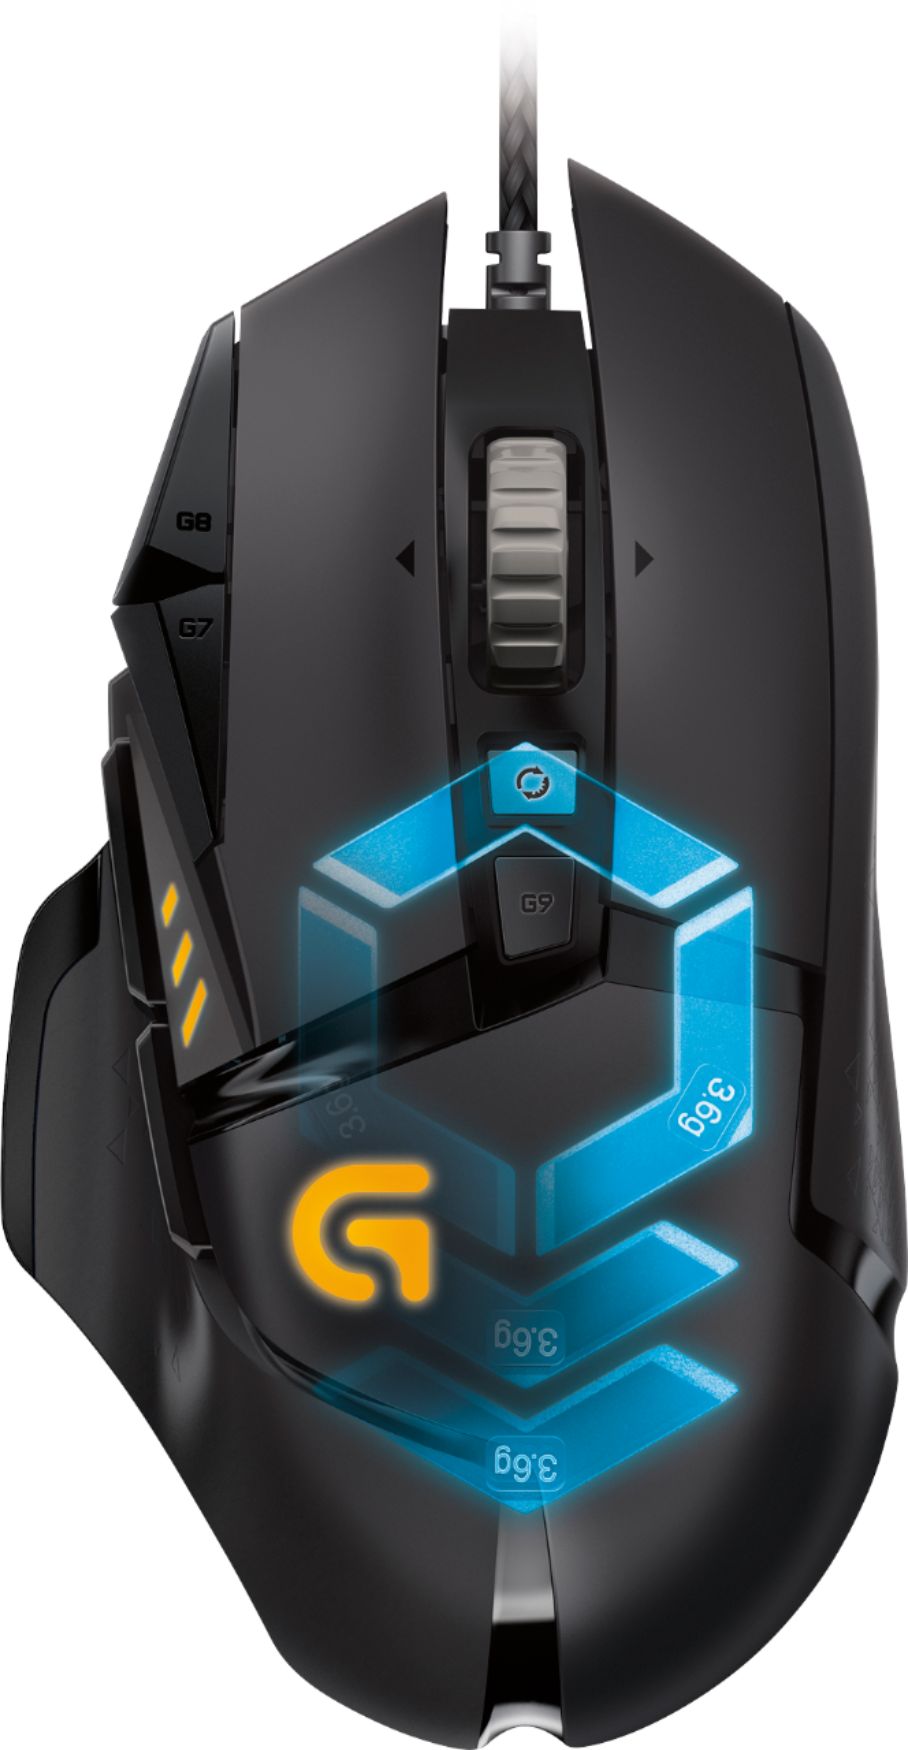 Logitech G502 X Gaming Mice Shed Weight, Gain Hybrid Optical Buttons - CNET